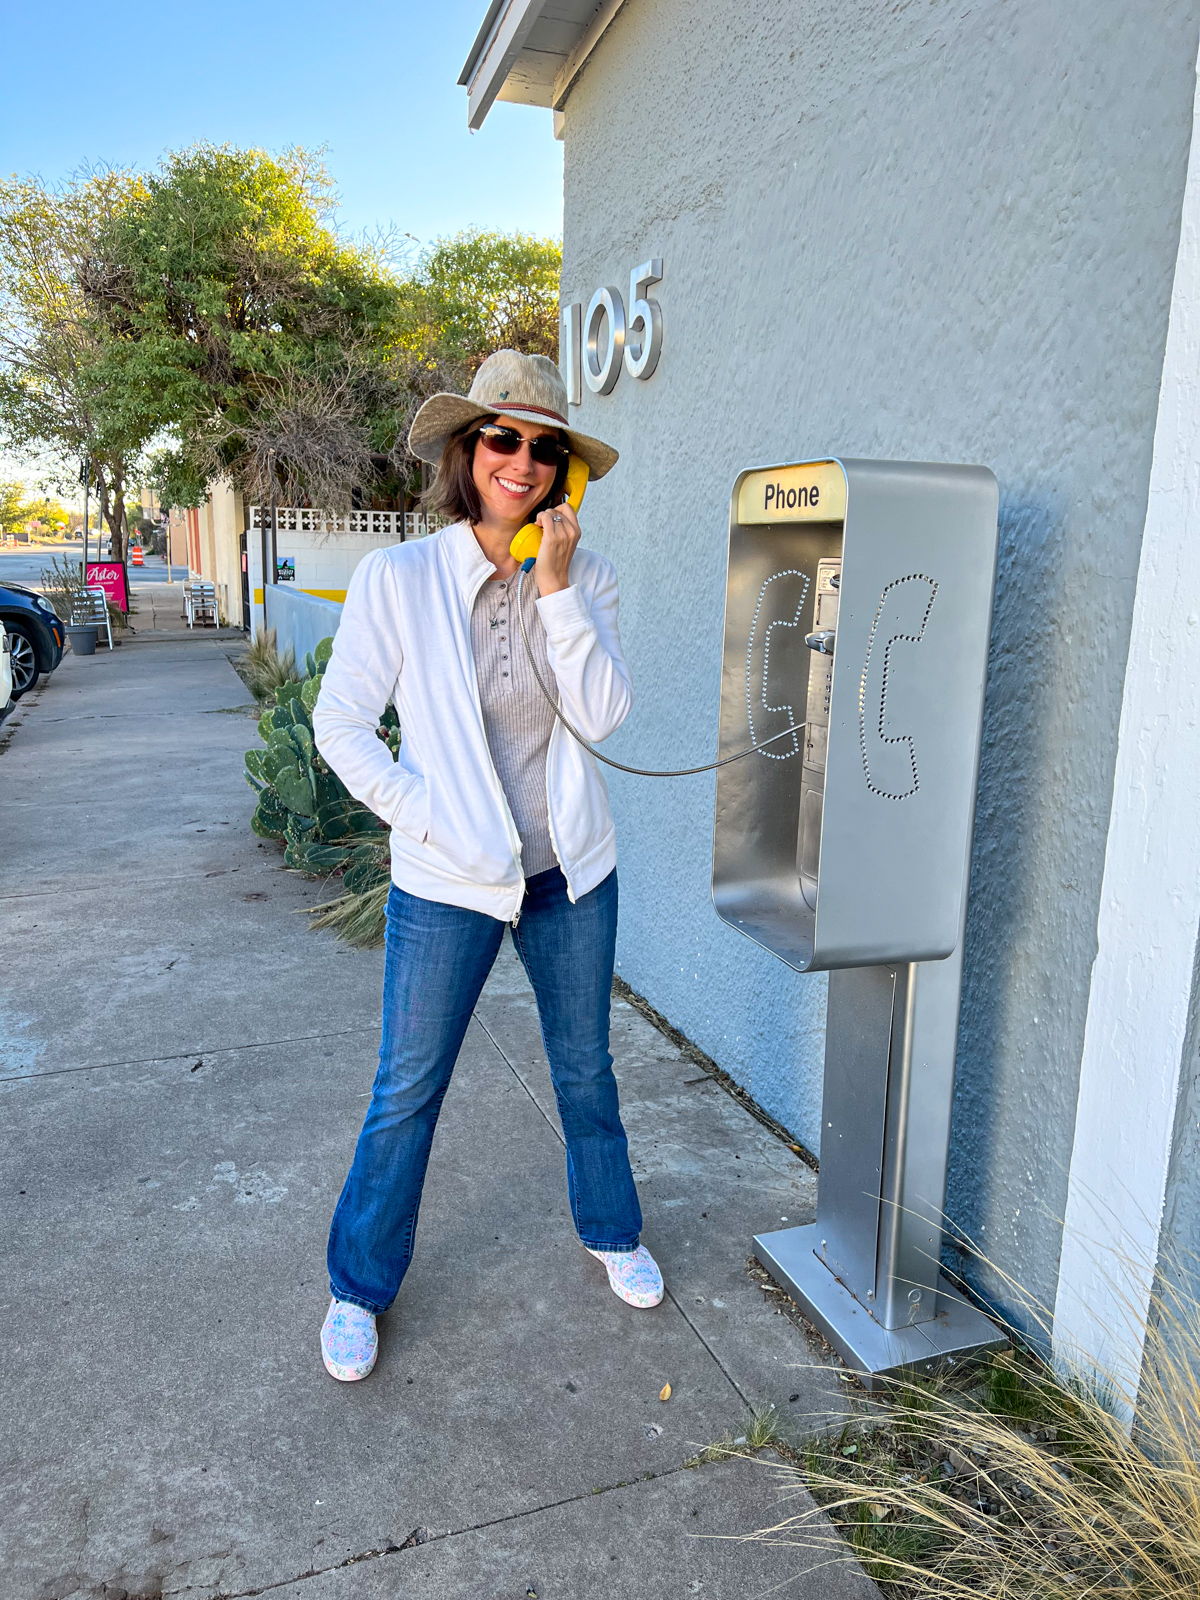 Kel listening to "Shake It Off" by Taylor Swift on a faux payphone in Marfa, Texas